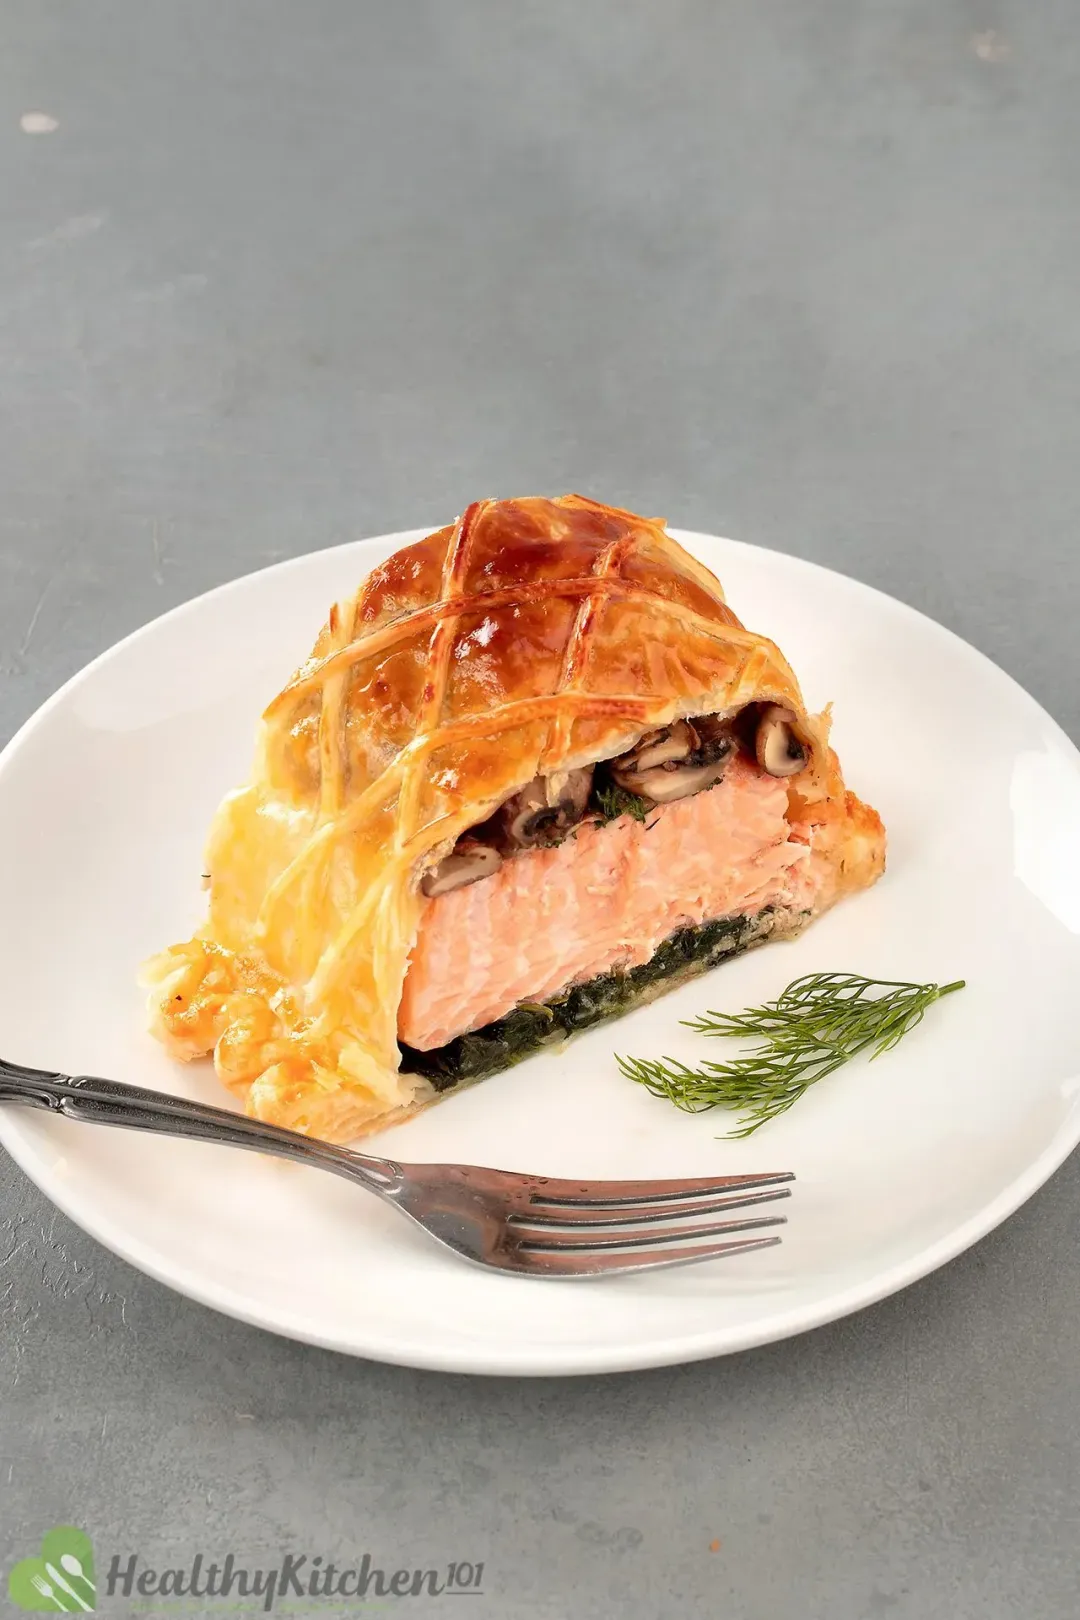 A slice of salmon en croute filled with pink salmon and cooked mushroom laid next to a fork and a fresh dill